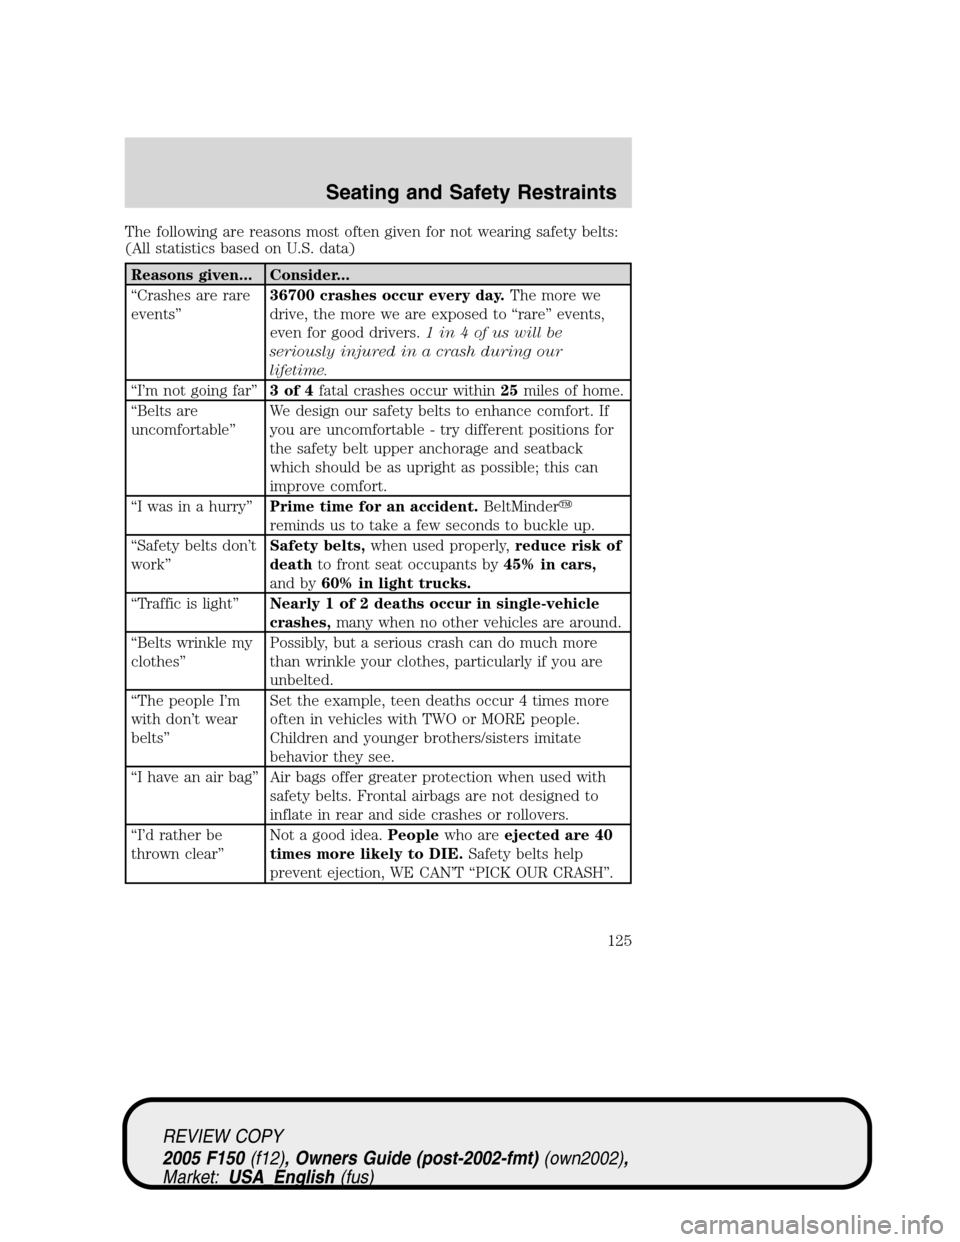 FORD F150 2005 11.G Owners Manual The following are reasons most often given for not wearing safety belts:
(All statistics based on U.S. data)
Reasons given... Consider...
“Crashes are rare
events”36700 crashes occur every day.The